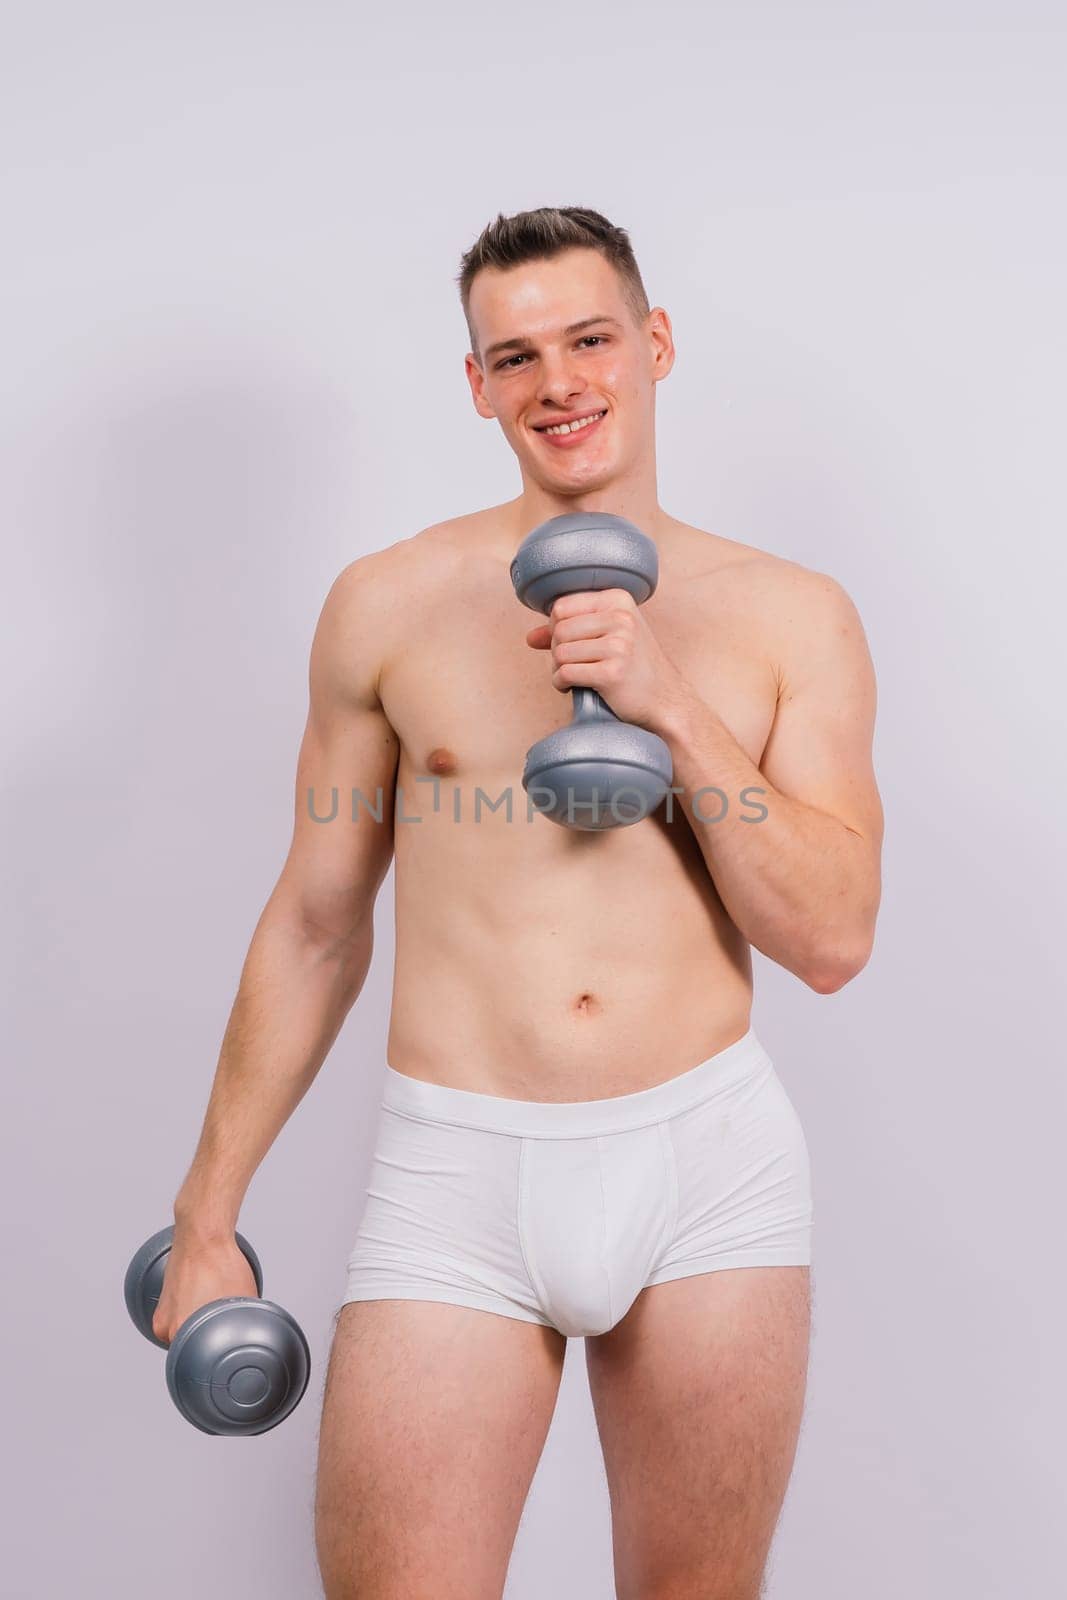 Shirtless bodybuilder holding dumbell and showing his muscular arms. by Zelenin